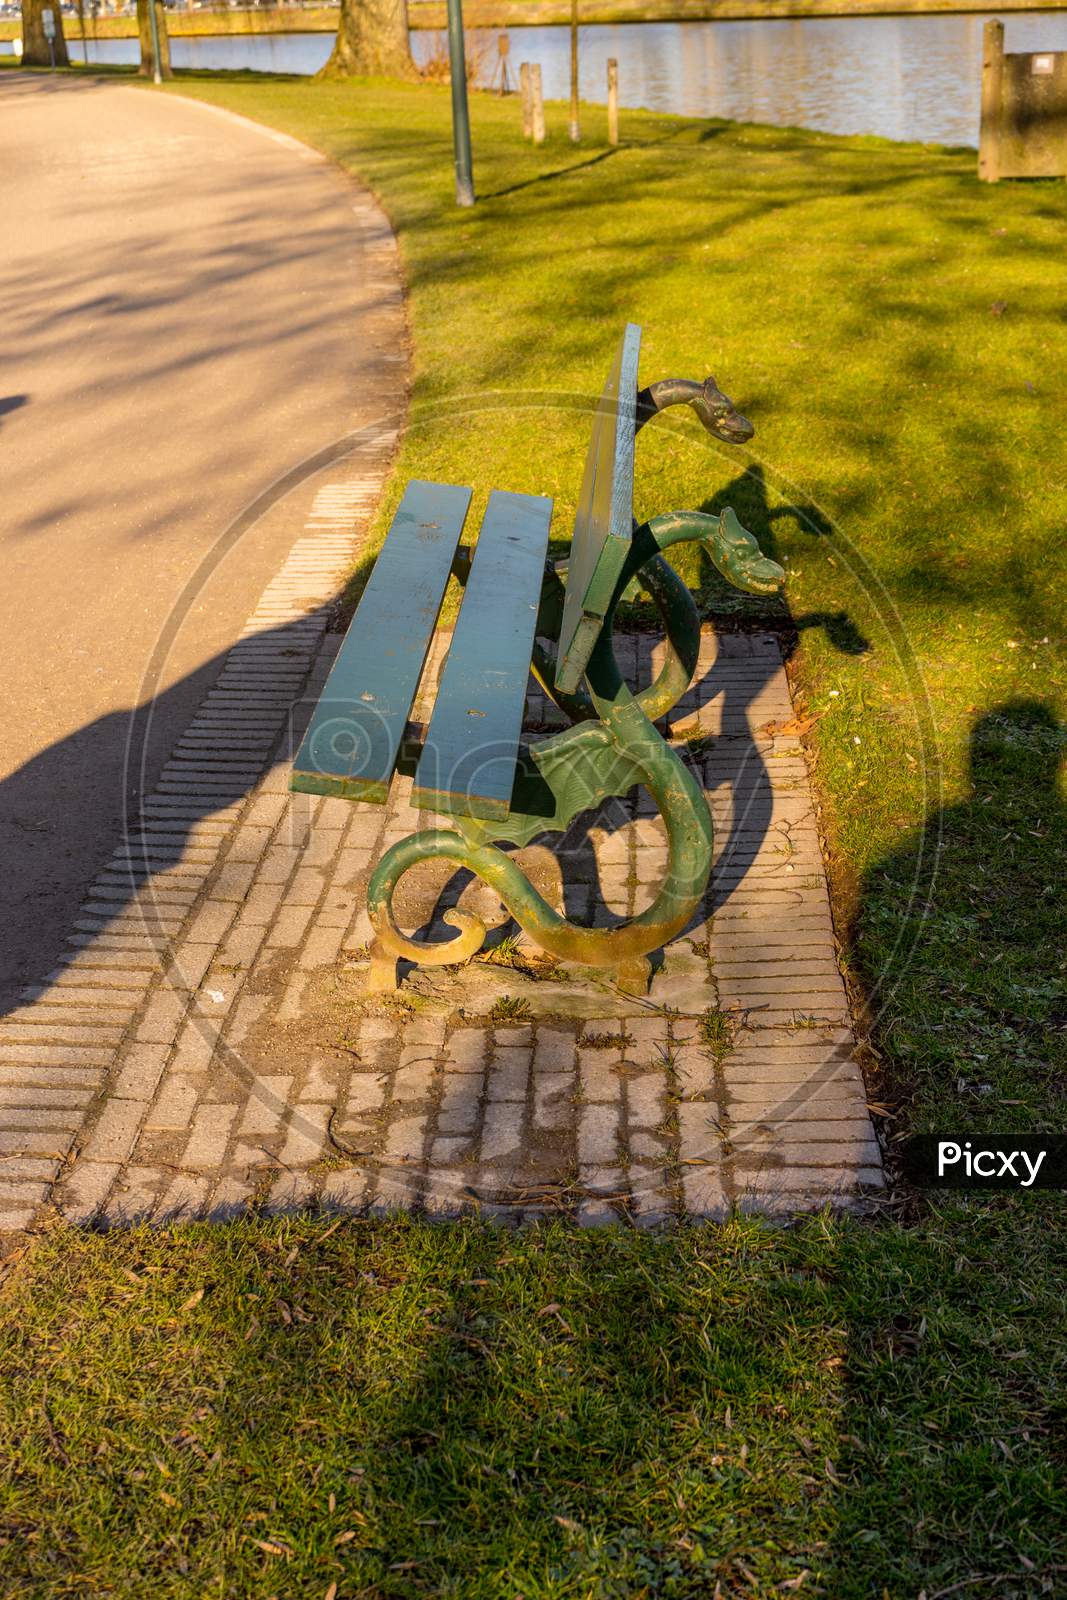 Belgium, Bruges, A Bench That Is Sitting In The Grass